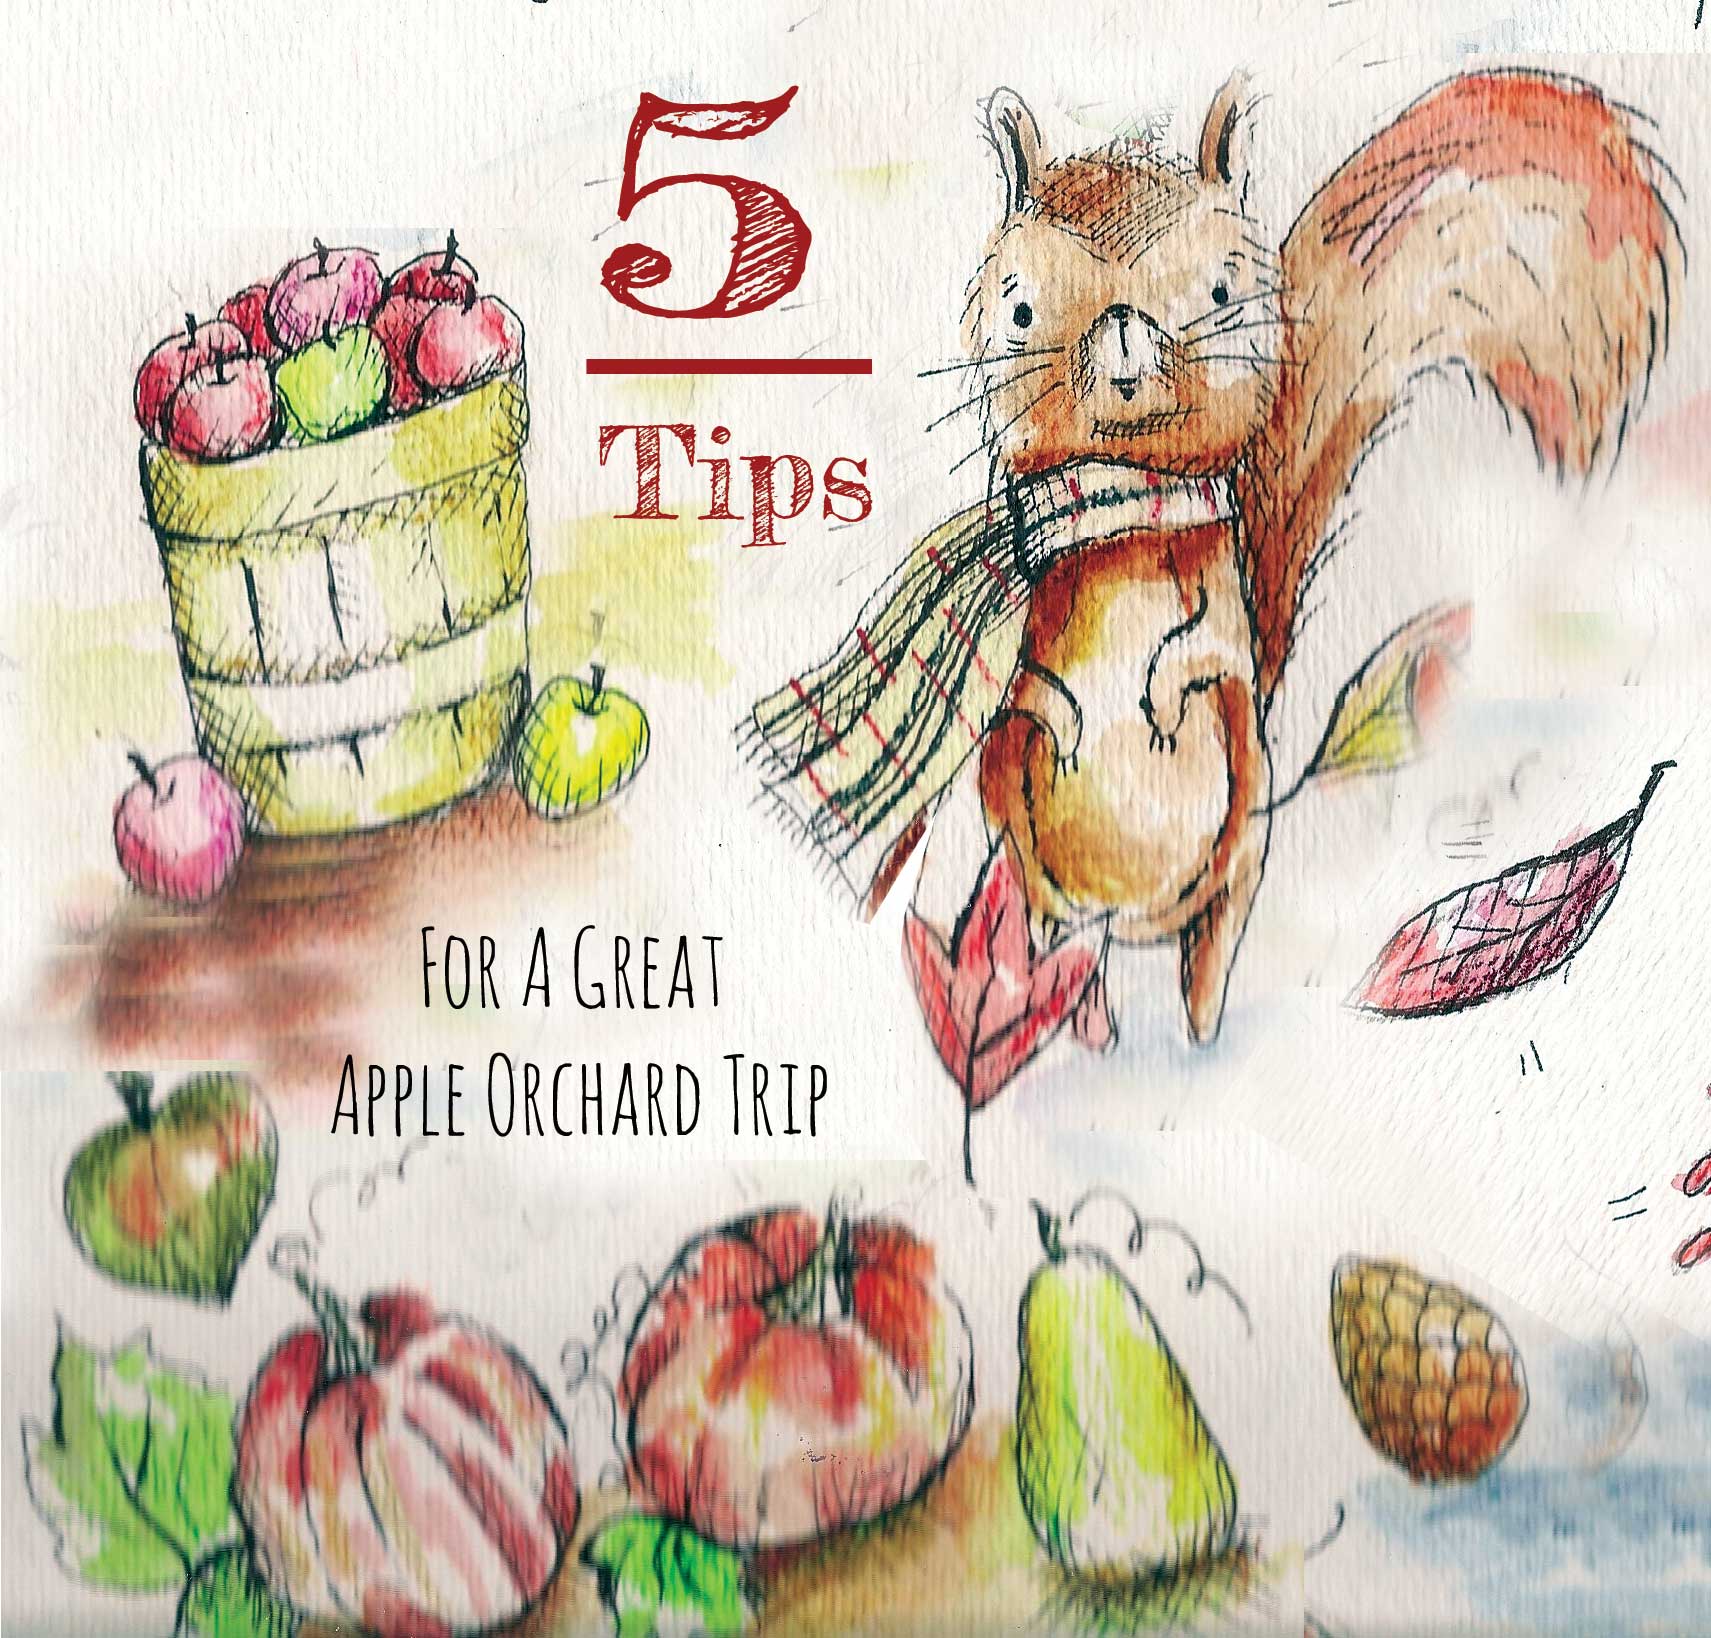 Plan Your Perfect Orchard Trip With These Tips